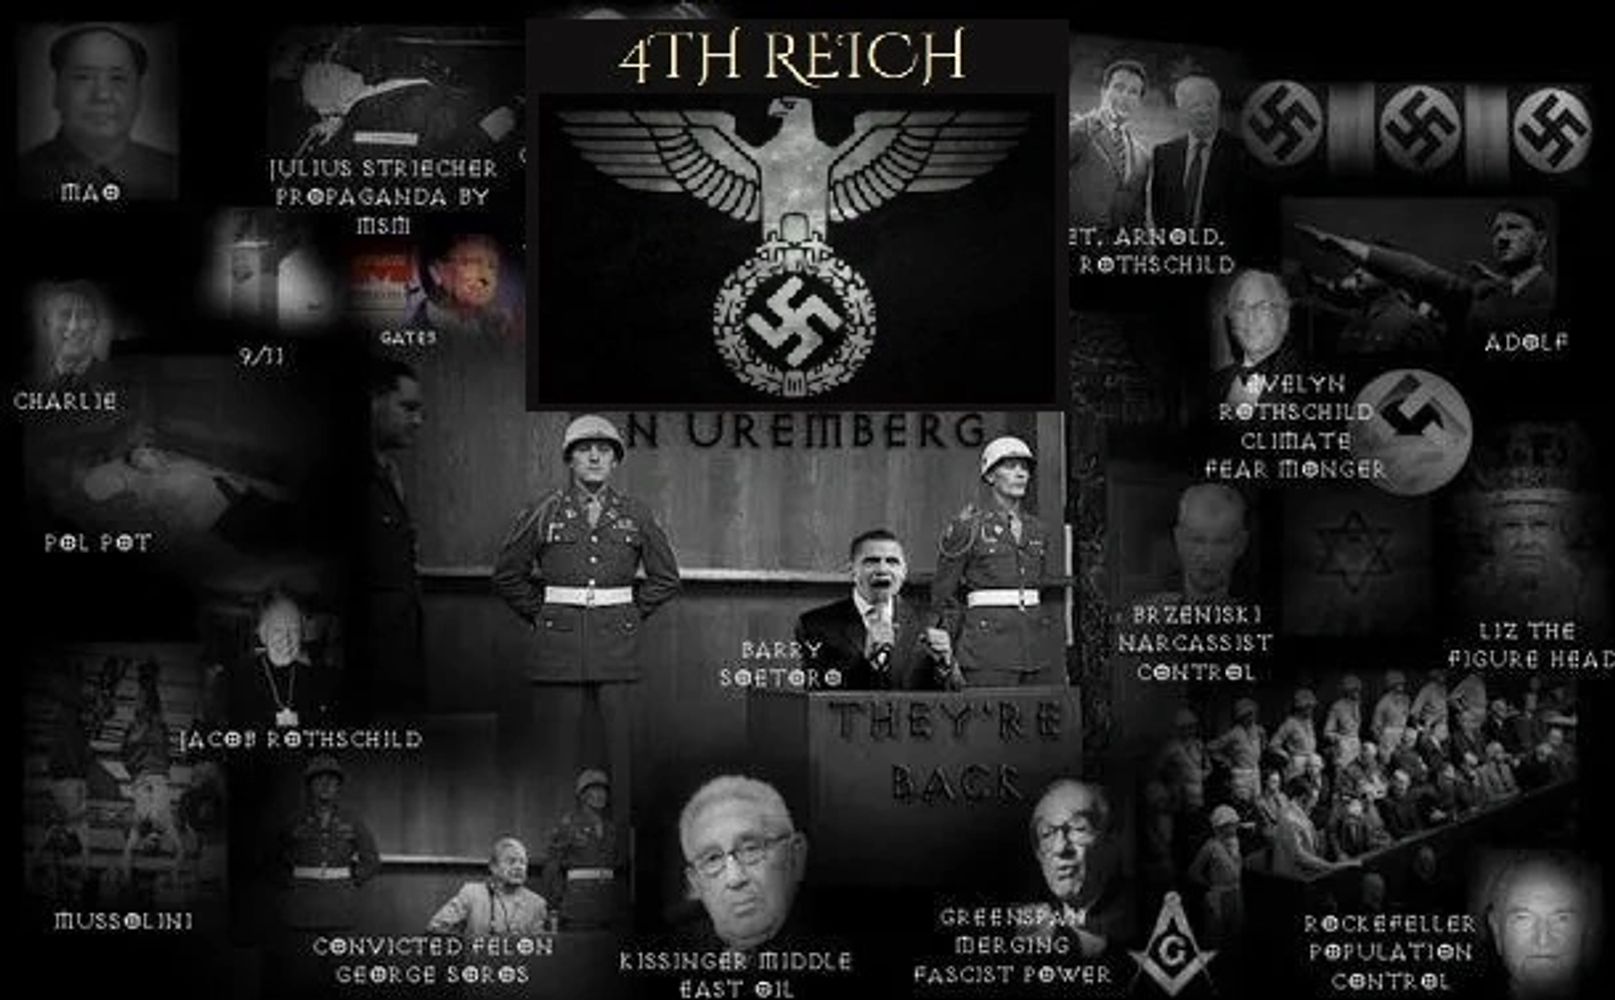 Hitler's 4th Reich Operation "Too Evil to Fail" with Covid-19 Plannedemic